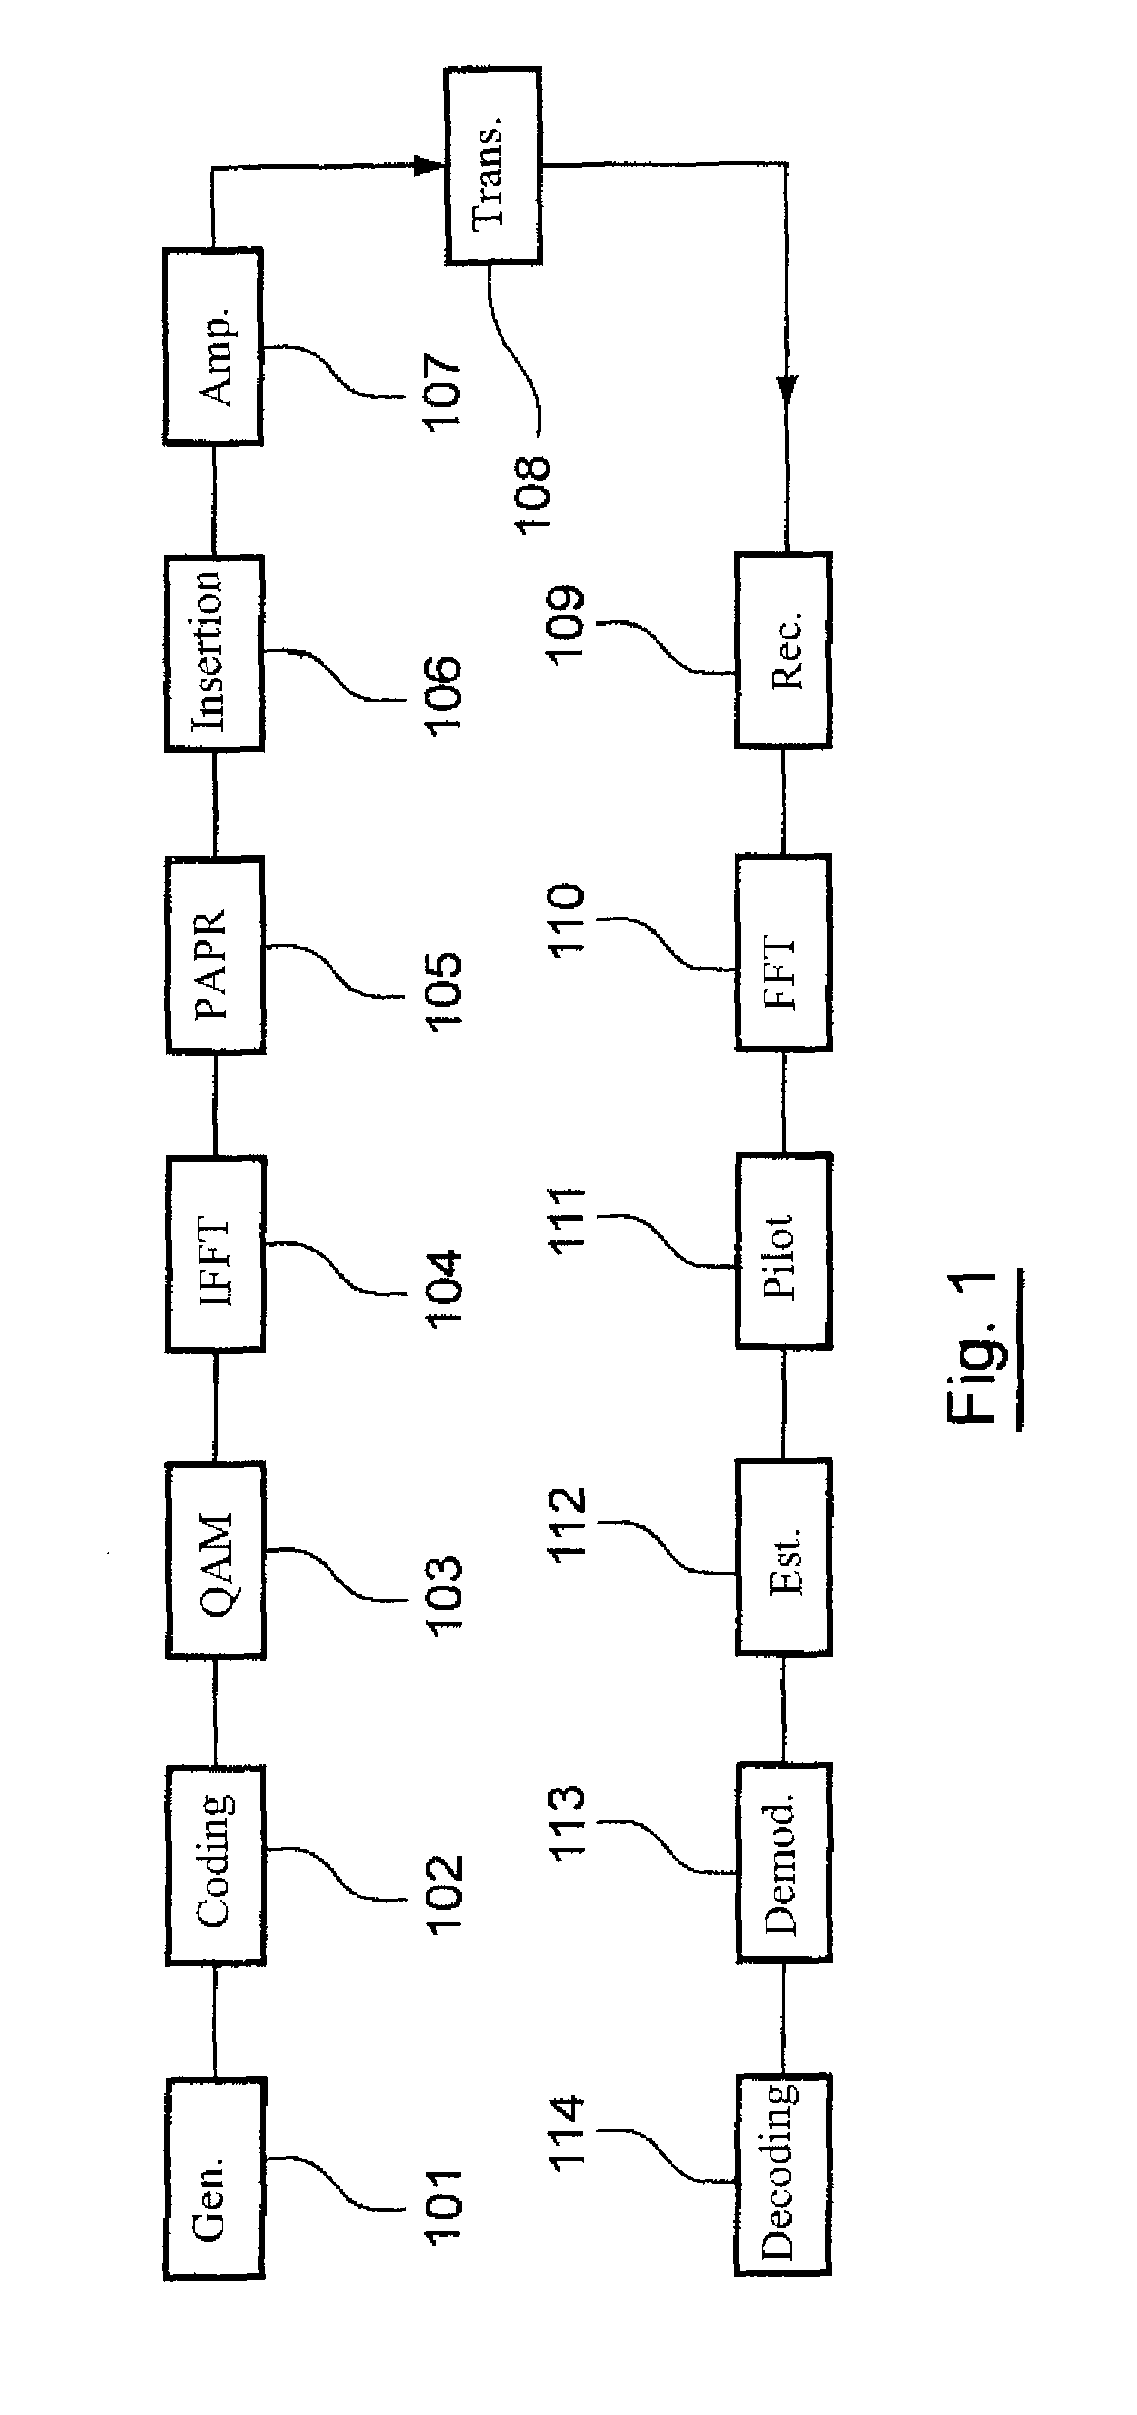 Peak-to-average power ratio reduction in a multicarrier signal